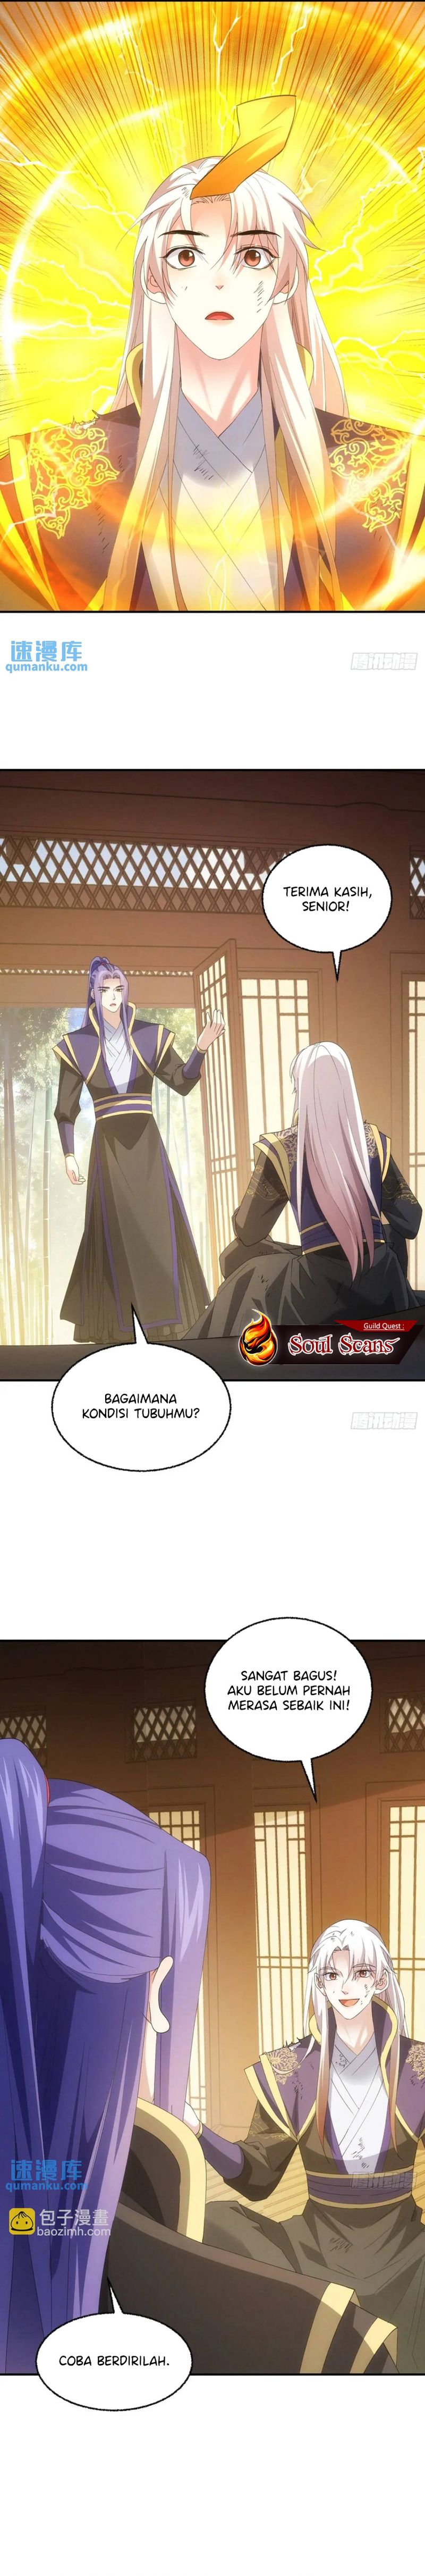 Dilarang COPAS - situs resmi www.mangacanblog.com - Komik i just dont play the card according to the routine 199 - chapter 199 200 Indonesia i just dont play the card according to the routine 199 - chapter 199 Terbaru 4|Baca Manga Komik Indonesia|Mangacan